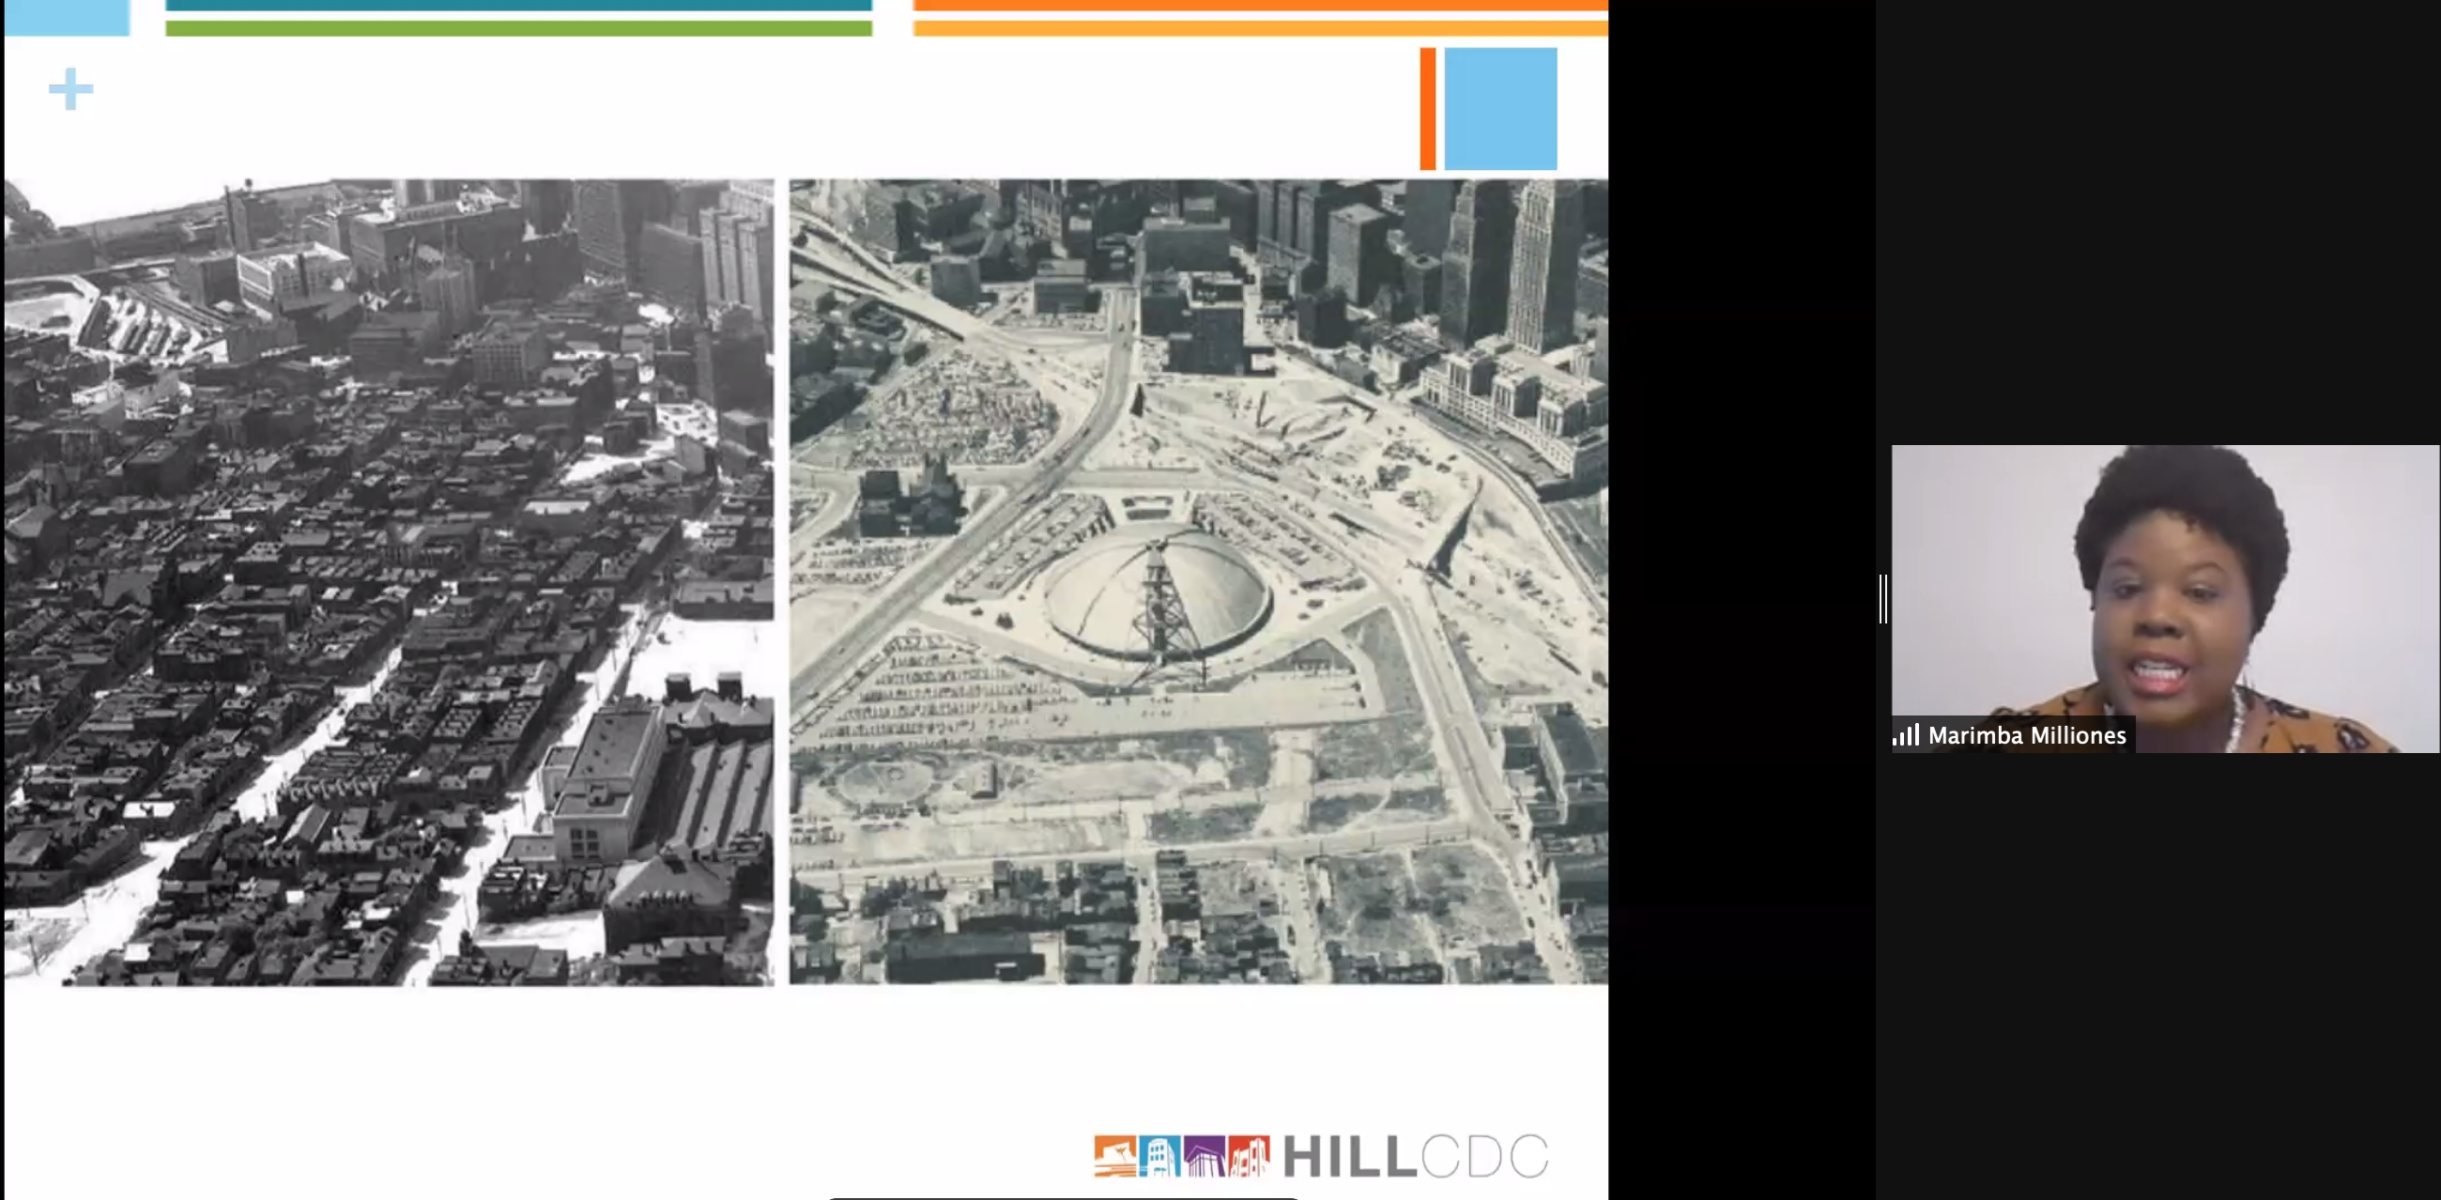 Marimba Milliones, president and CEO of the Hill District CDC, shows aerial photos of the Hill before and after the construction of the Civic Arena, at a community meeting on March 15, 2021. (Screenshot)